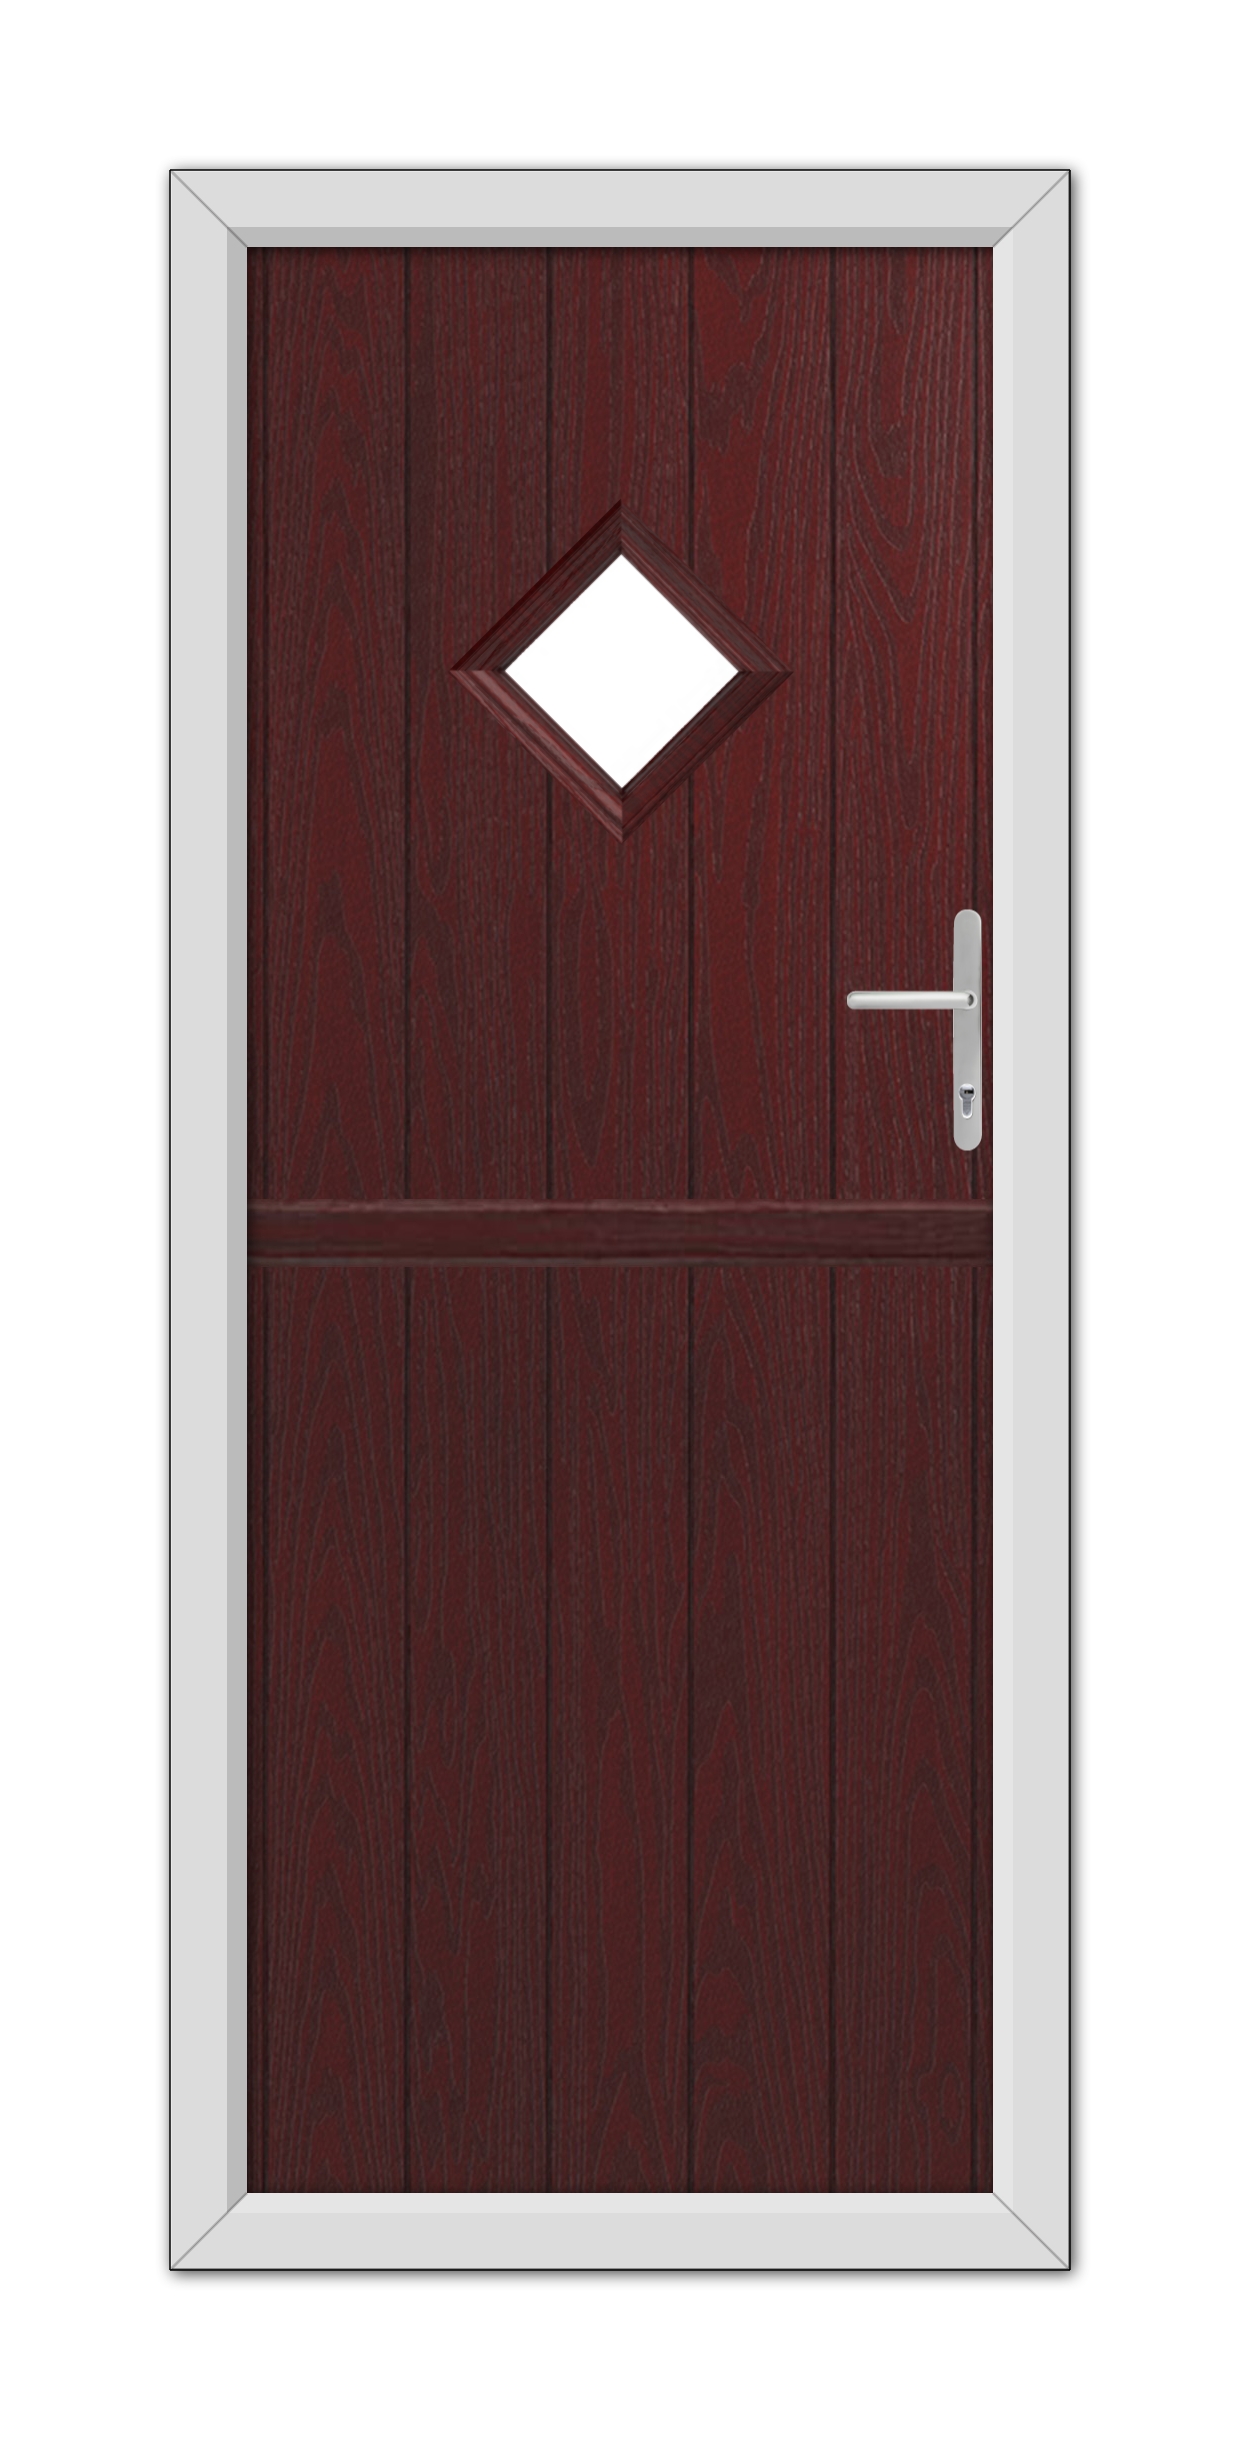 A modern Rosewood Cornwall Stable Composite Door 48mm Timber Core with a small diamond-shaped window and a white metal handle, set in a white frame.